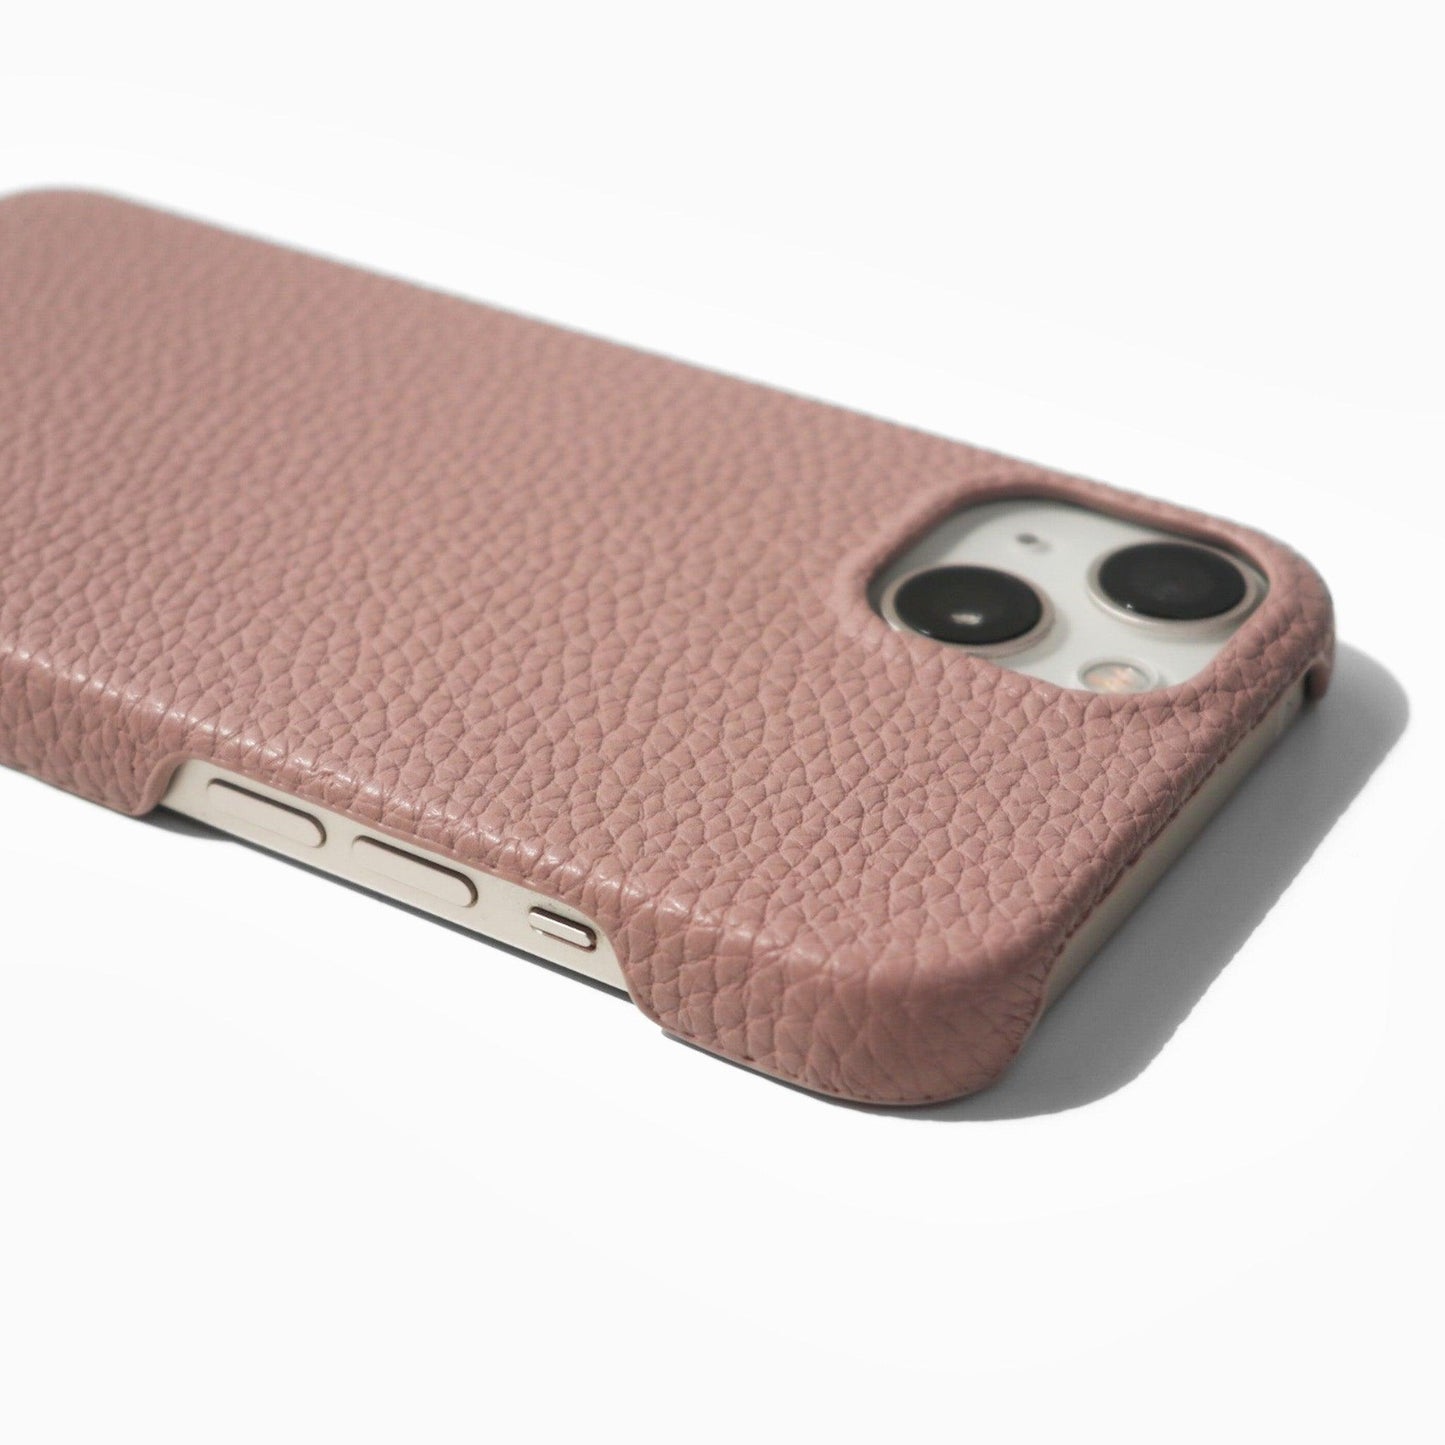 iPhone Thin Case - Dusty Pink